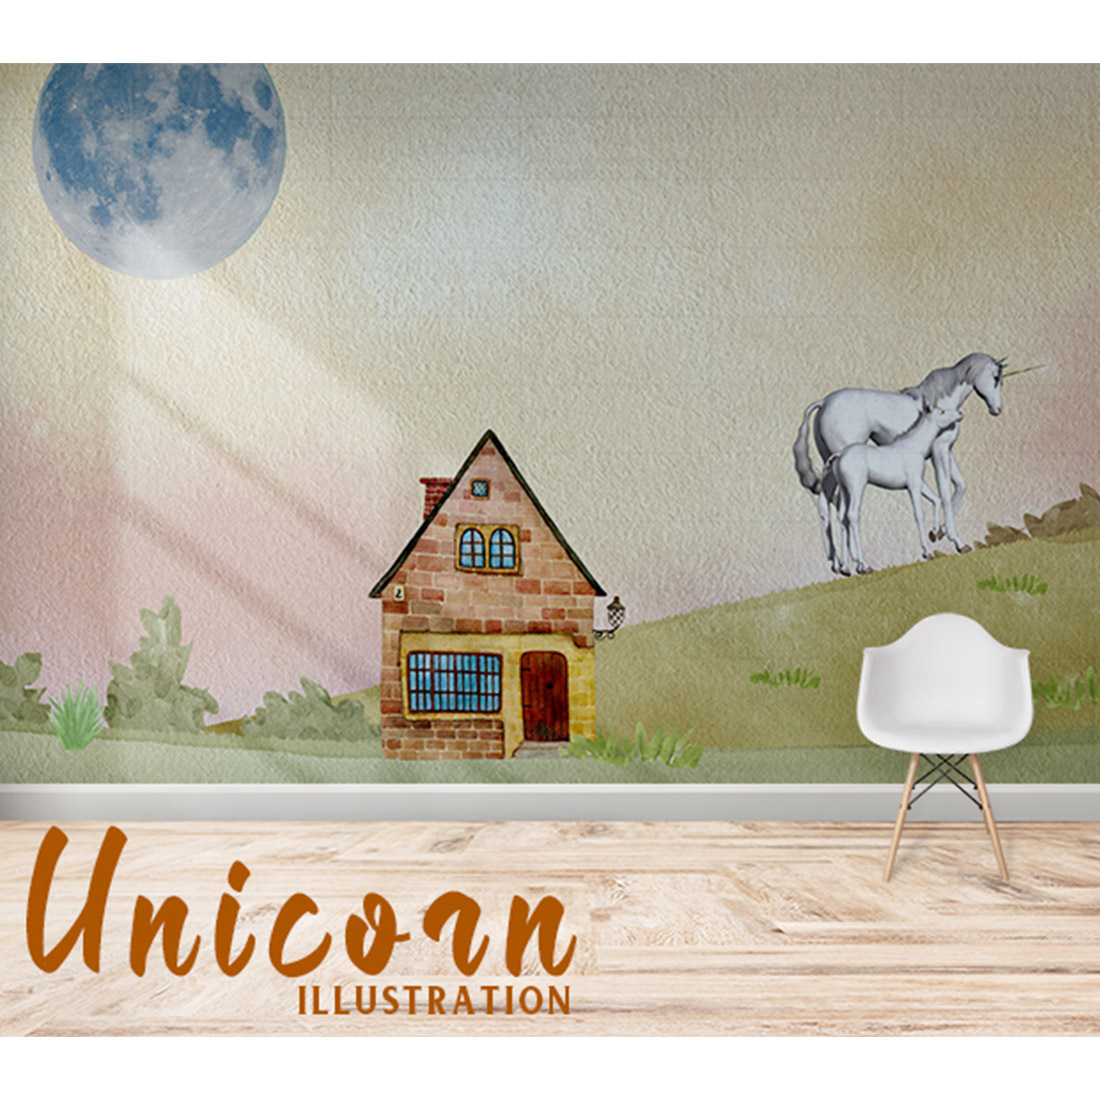 Enchanting image on the wall with a unicorn